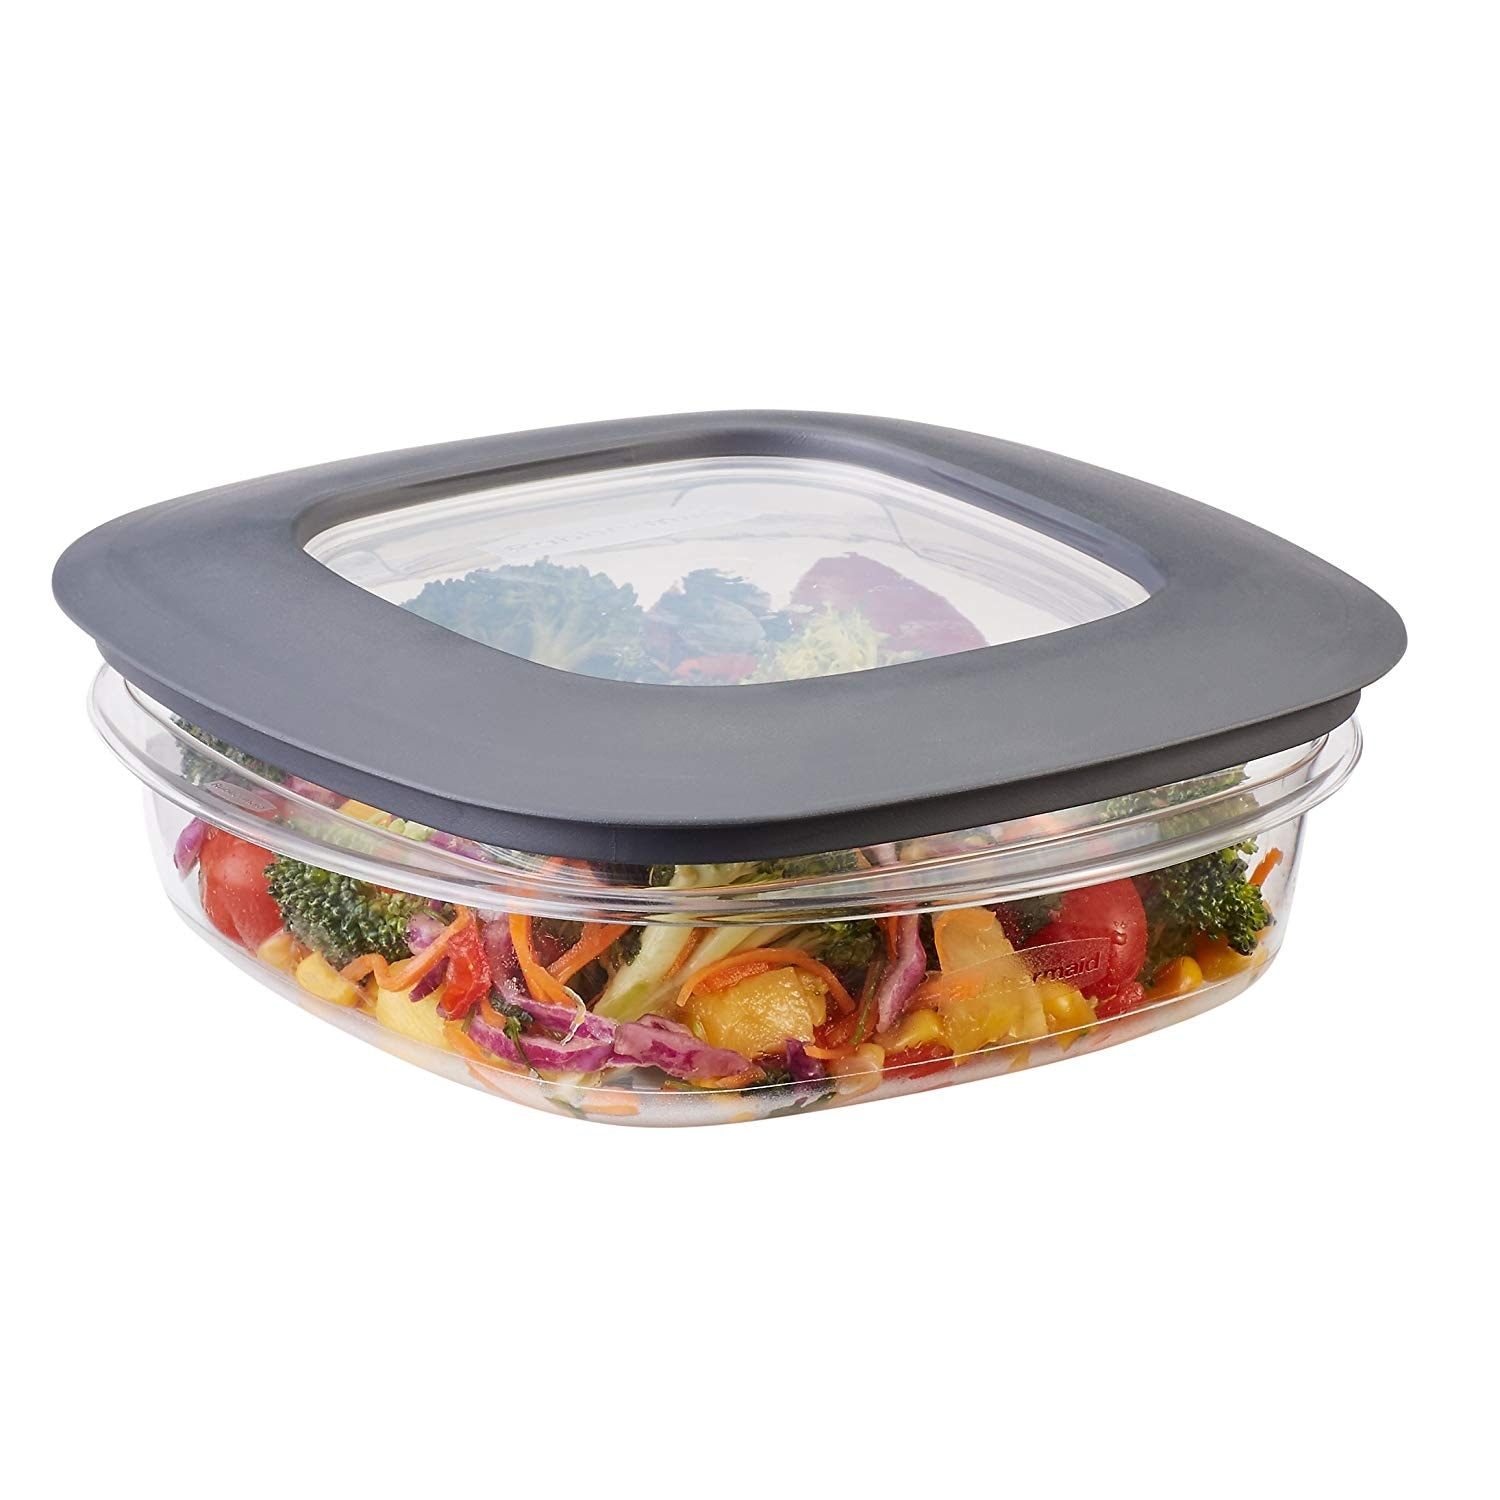 https://ak1.ostkcdn.com/images/products/is/images/direct/1e7c19a6665c88e91ad61d0e9437634e937992b4/Rubbermaid-Premier-Easy-Find-Lids-Meal-Prep-and-Food-Storage-Containers%2C-Set-of-6%2C-Grey.jpg